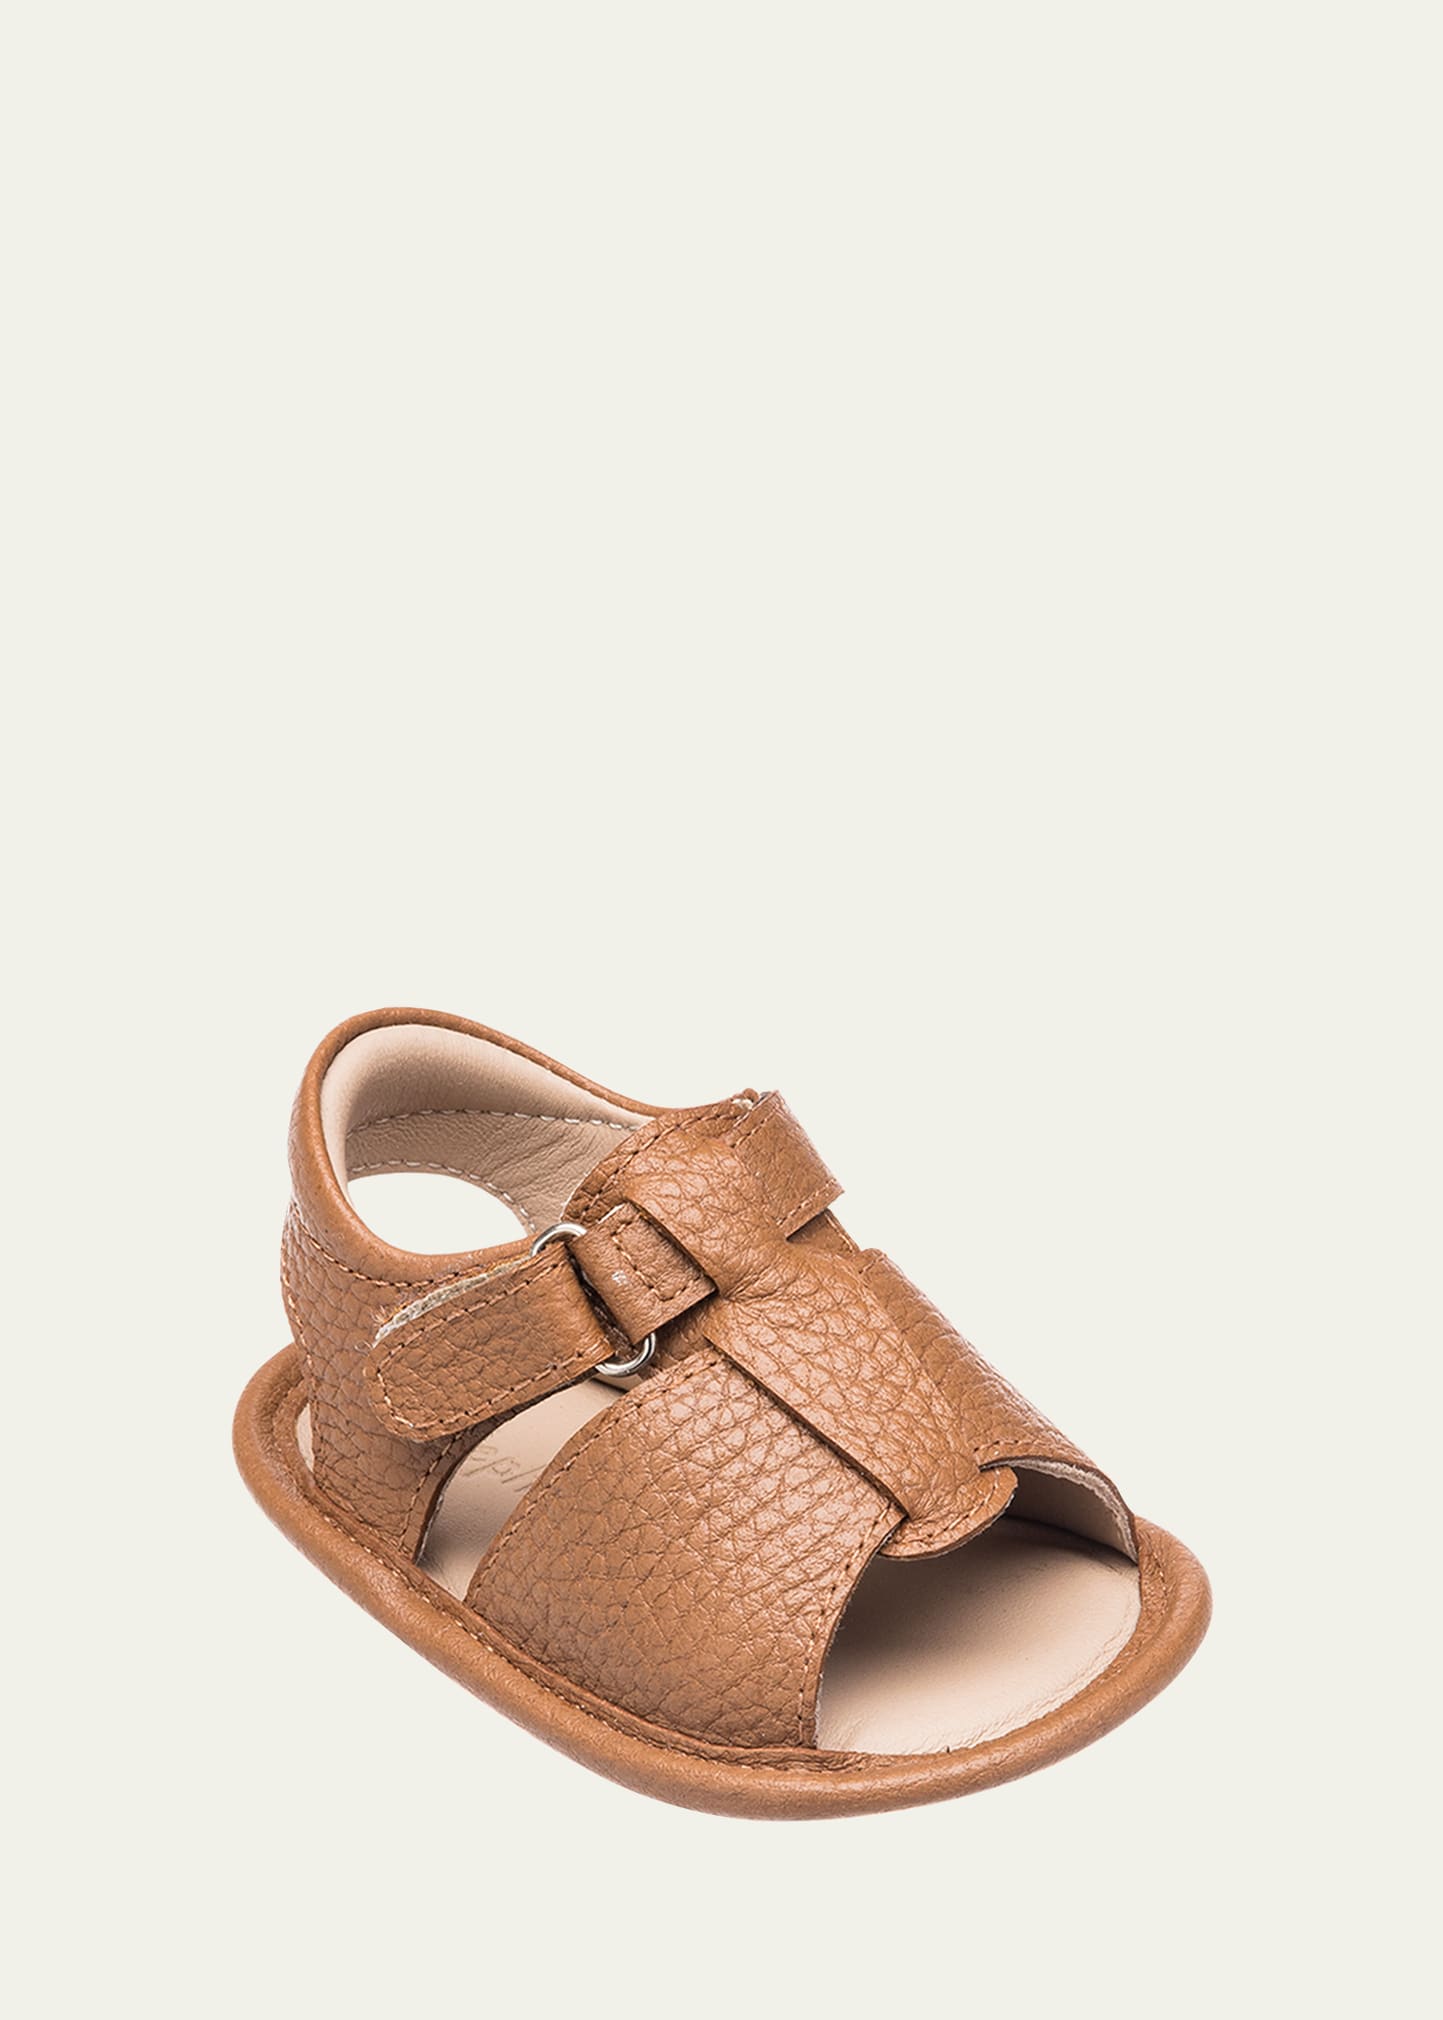 Elephantito Boy's Caged Leather Sandals, Baby/toddler/kids